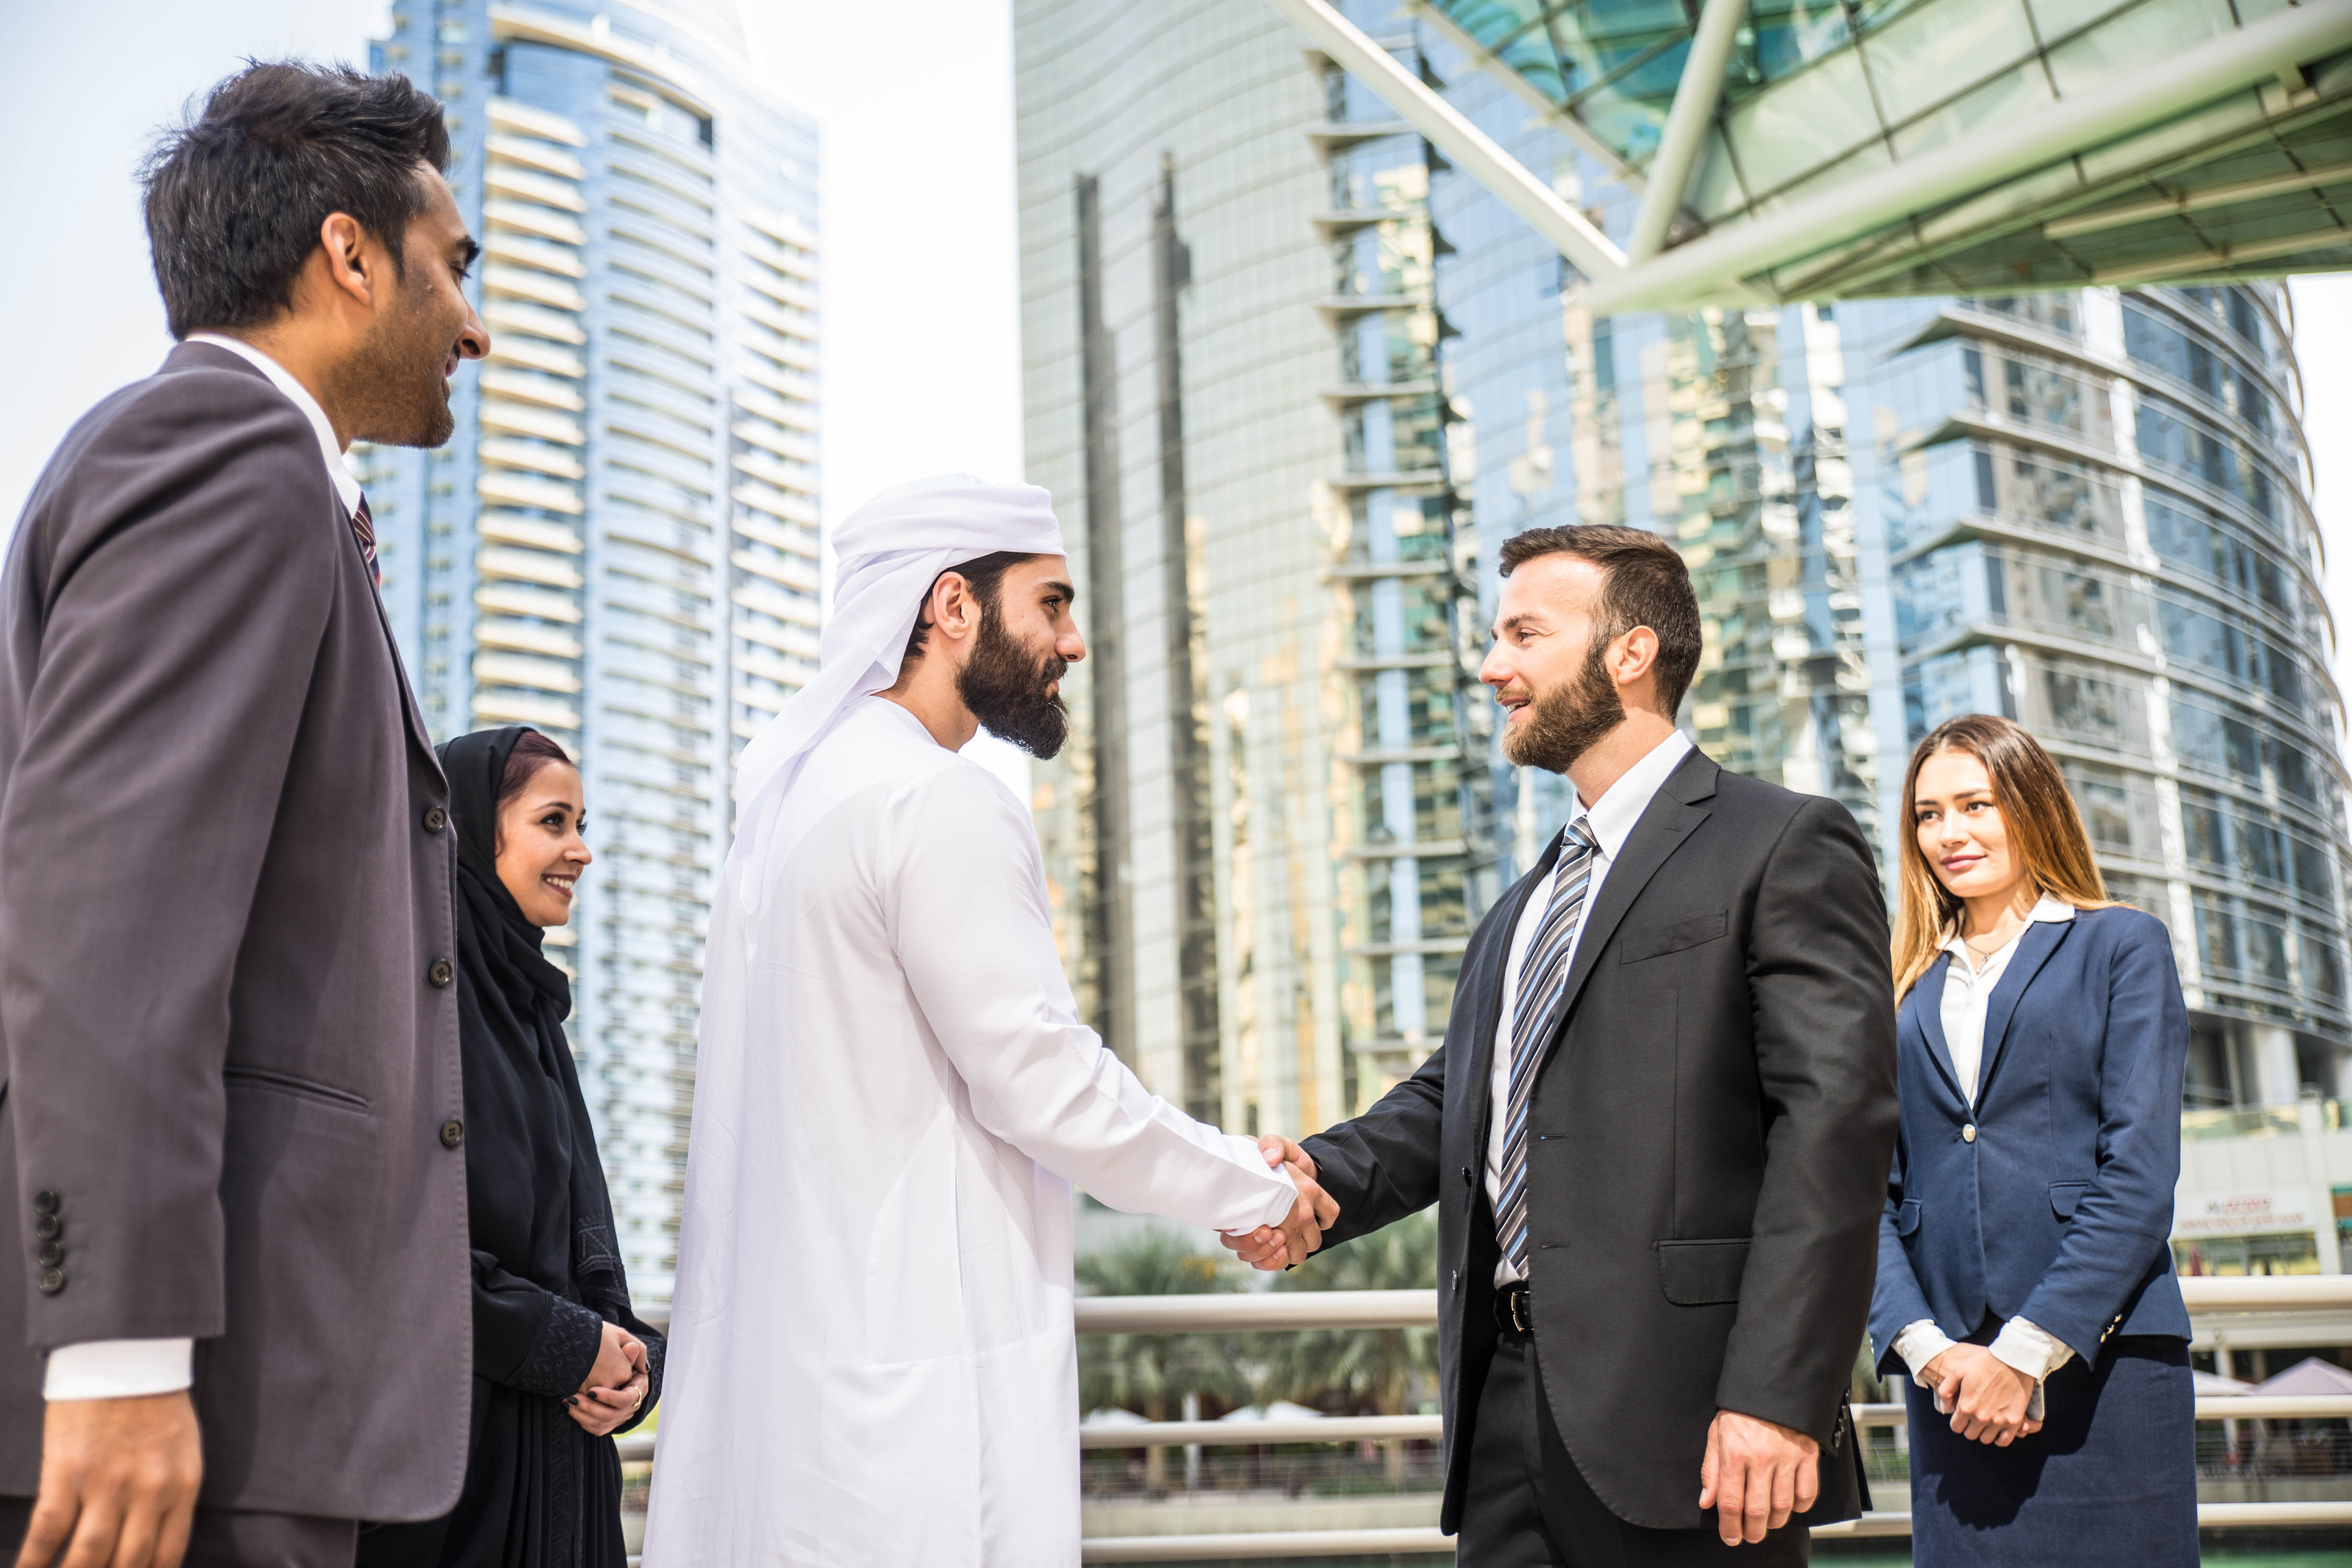 Conclusion of a deal in the Dubai for starting a business and obtaining a residence permit in the UAE